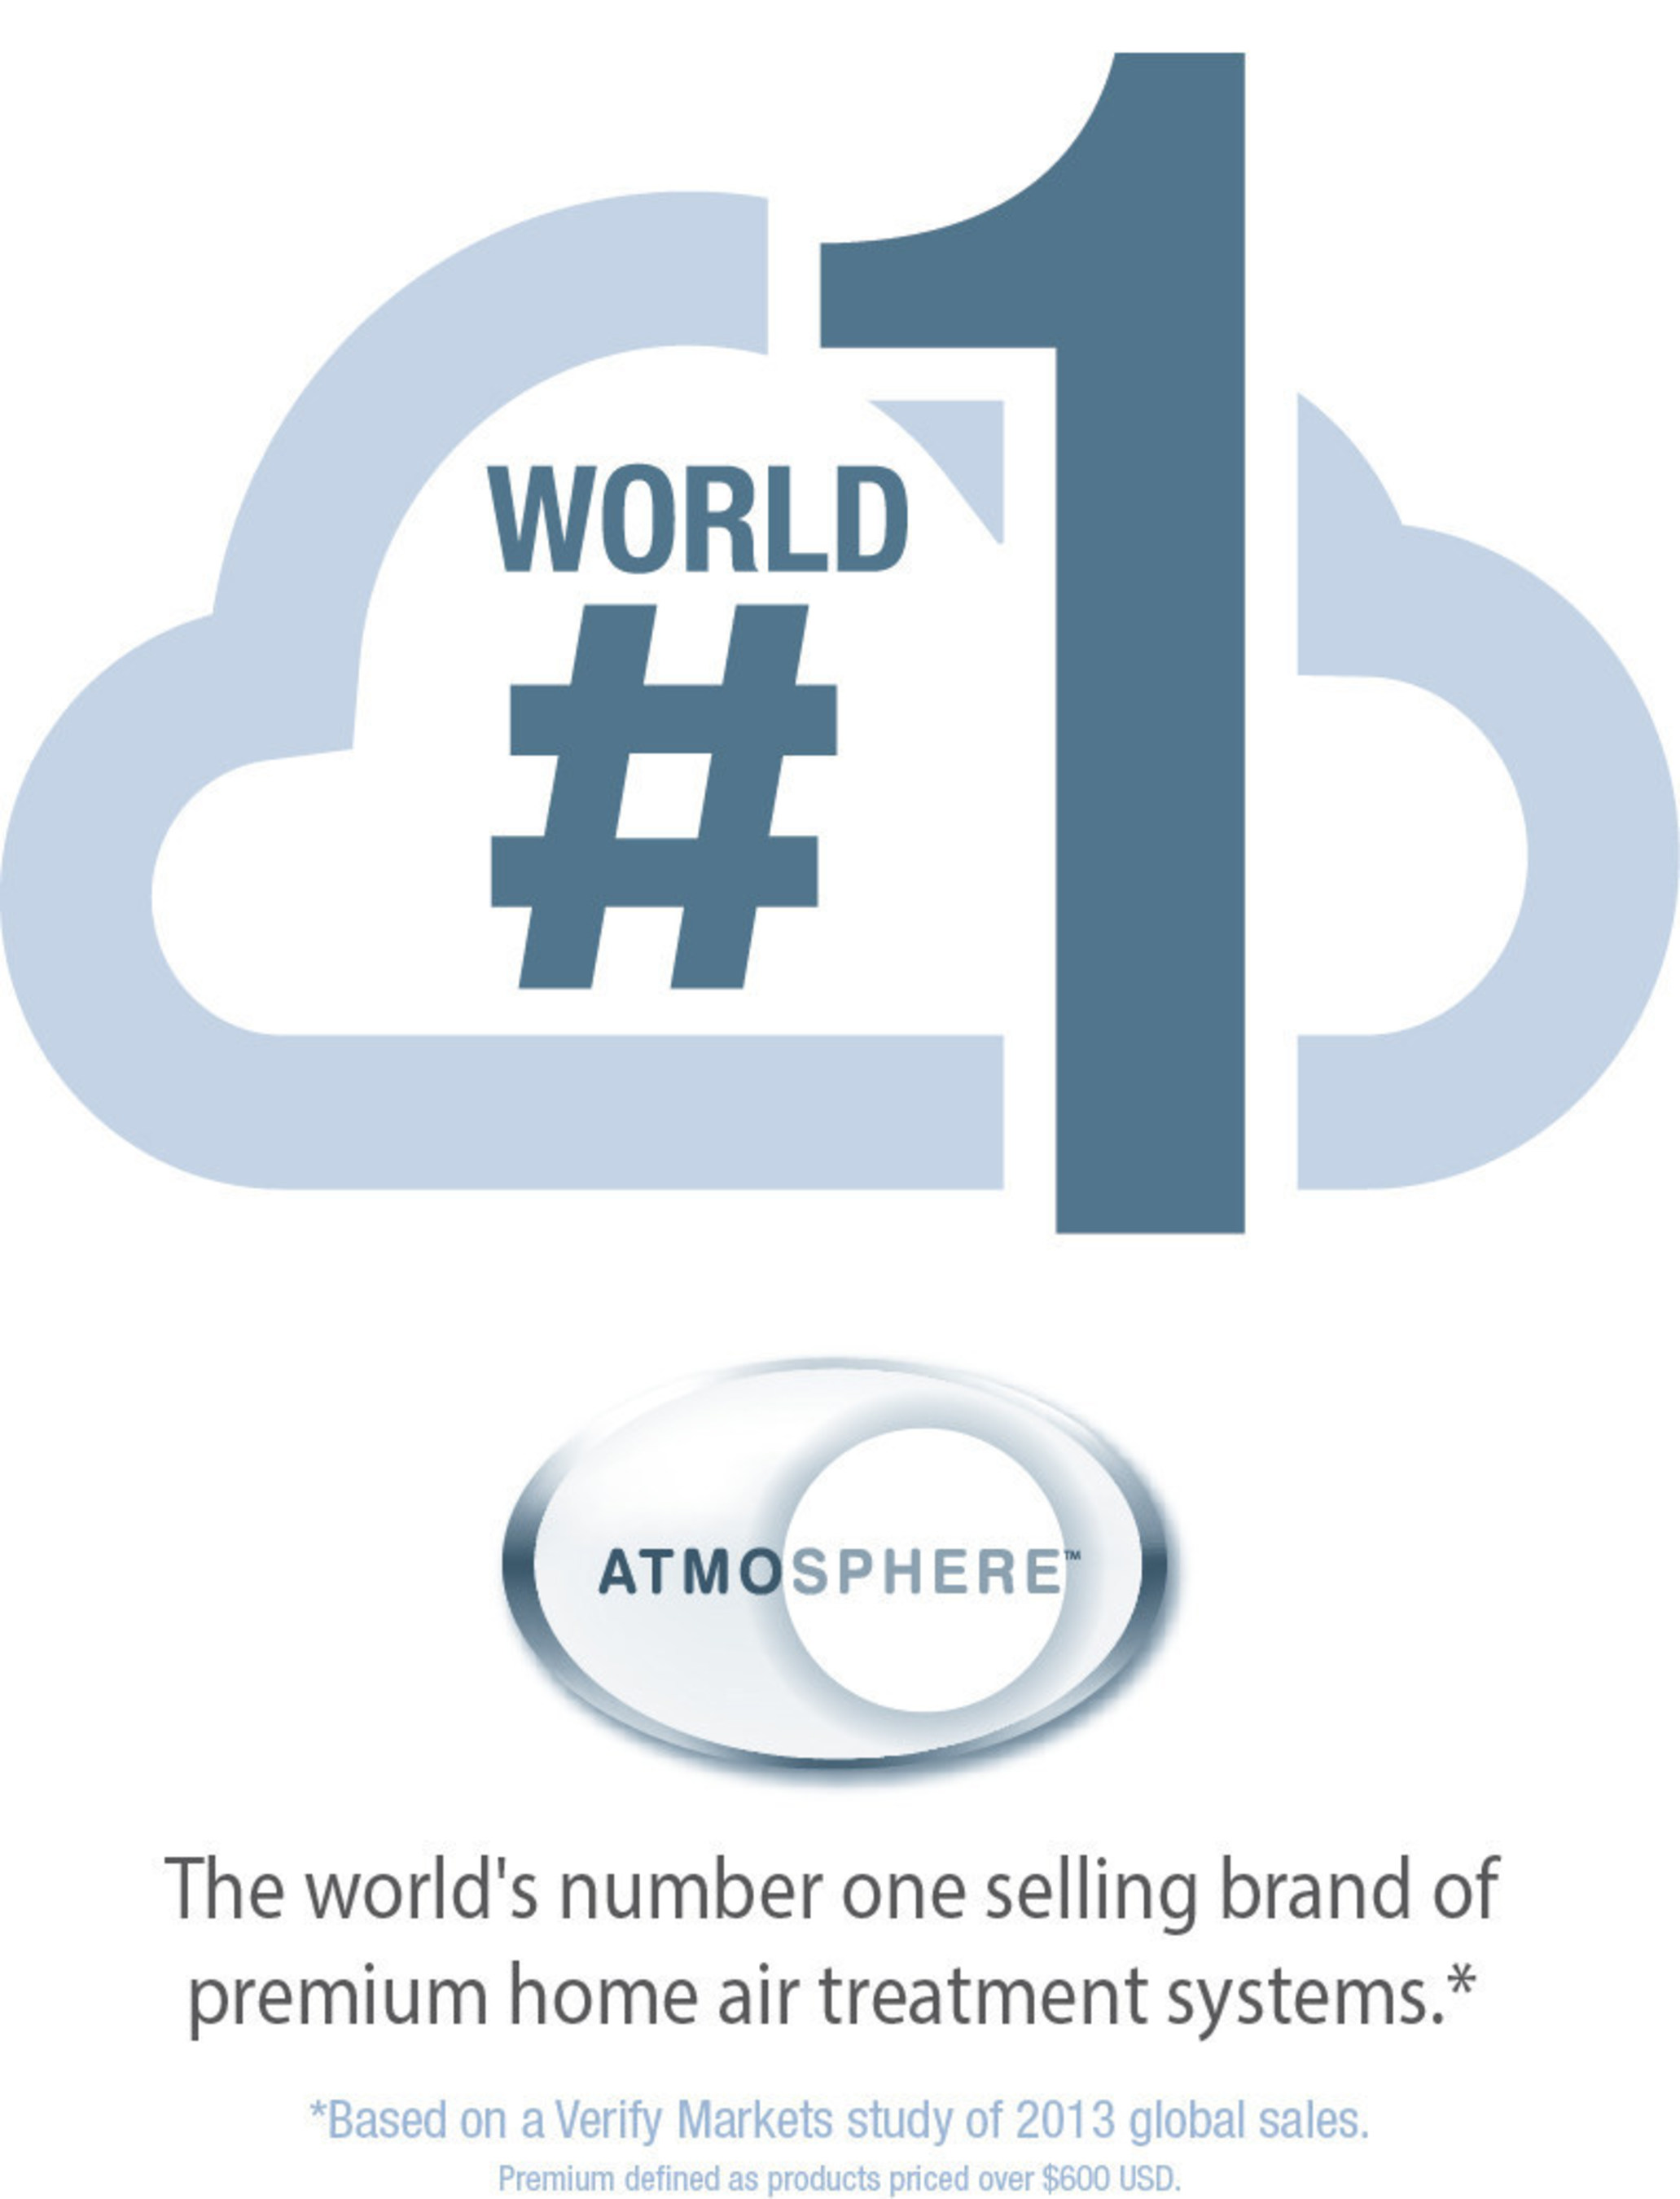 Based on the Verify Markets study of 2013 global sales, Atmosphere is the world's number one selling brand of premium home air treatment systems